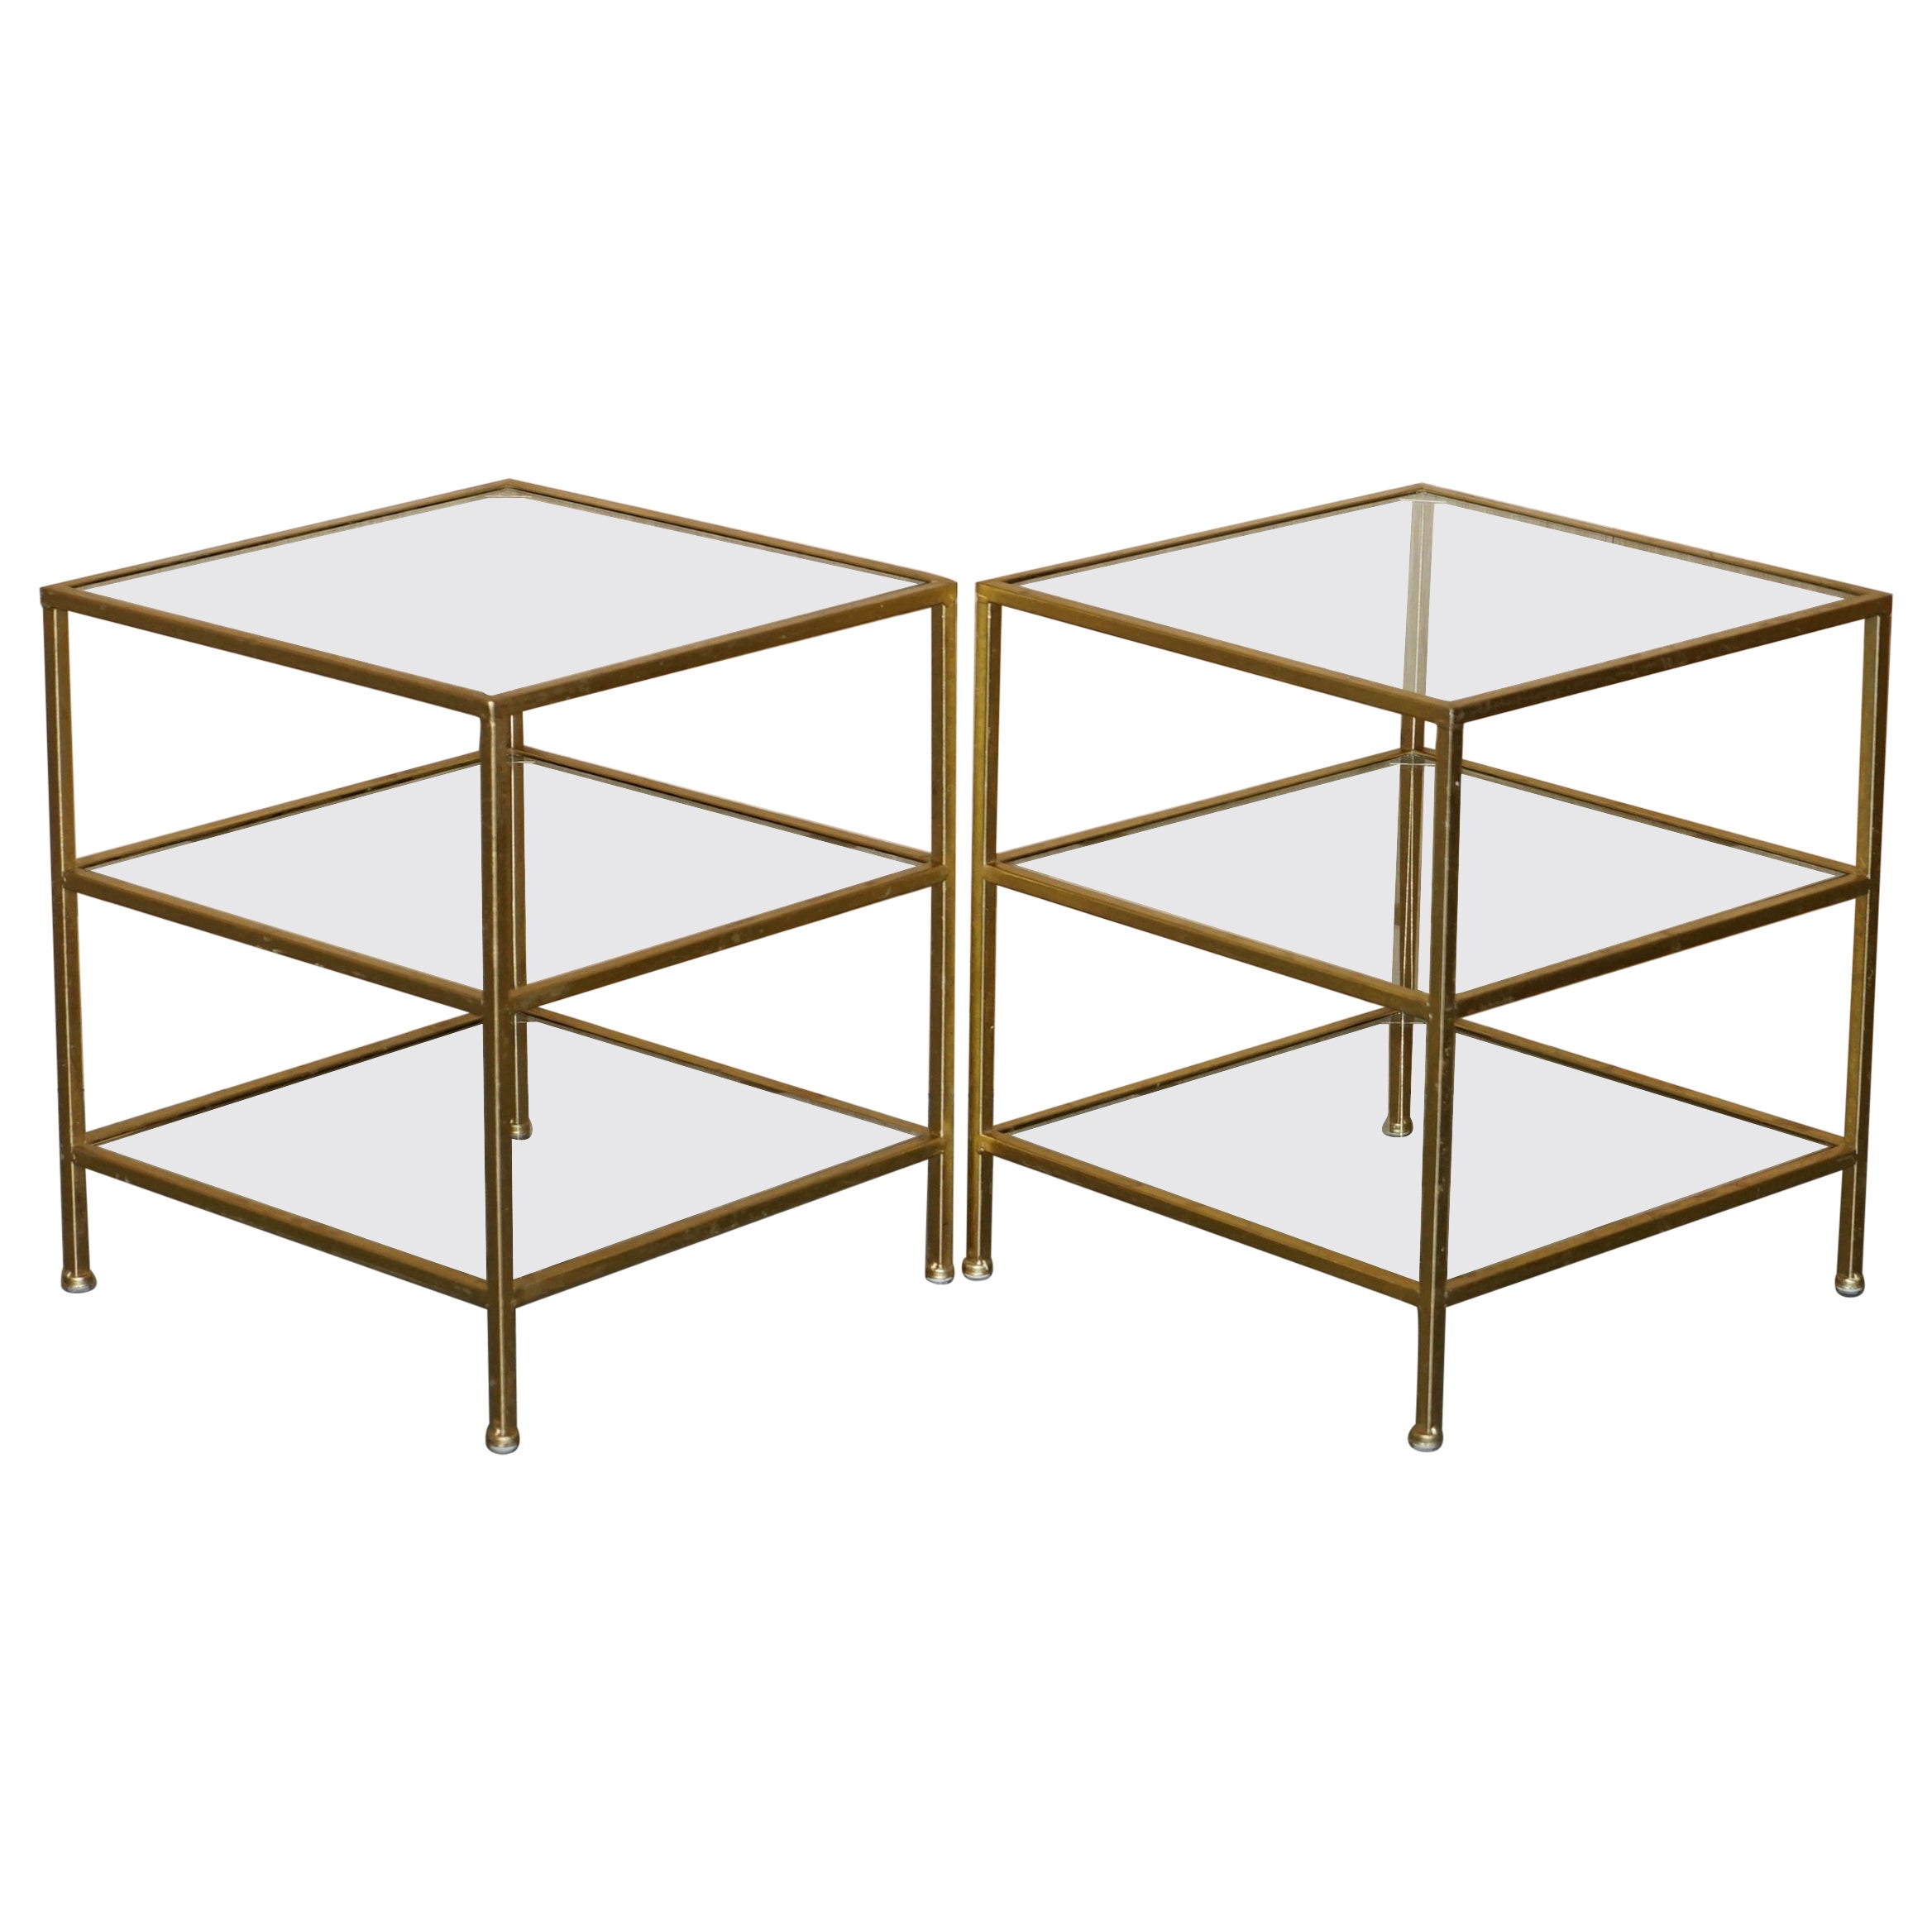 FINE PAIR OF VINTAGE GOLD LEAF PAINTED & GLASS THREE TiER ETAGERE SIDE TABLES For Sale